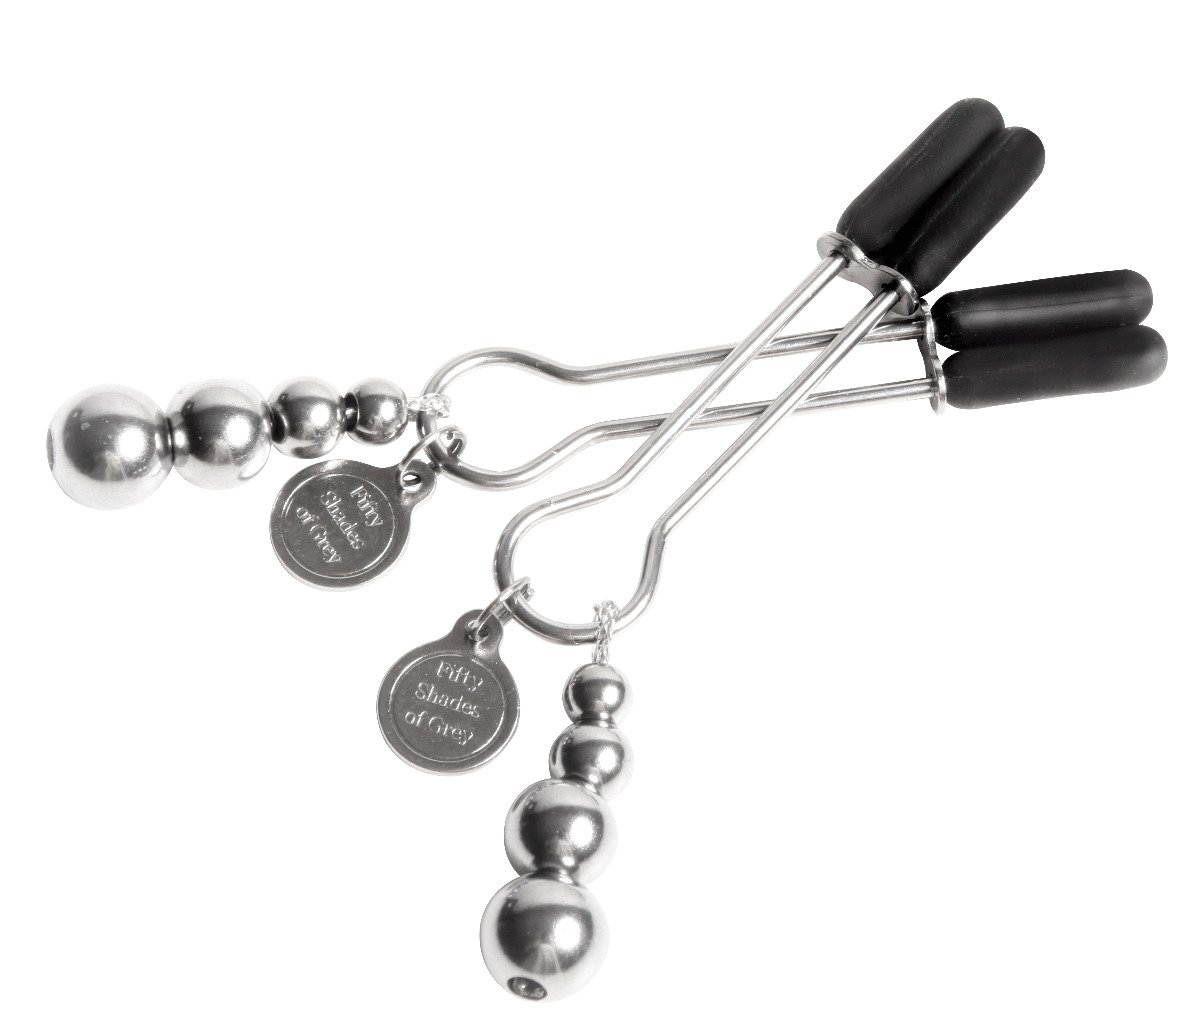 Nipple clamps for the erogenous zones